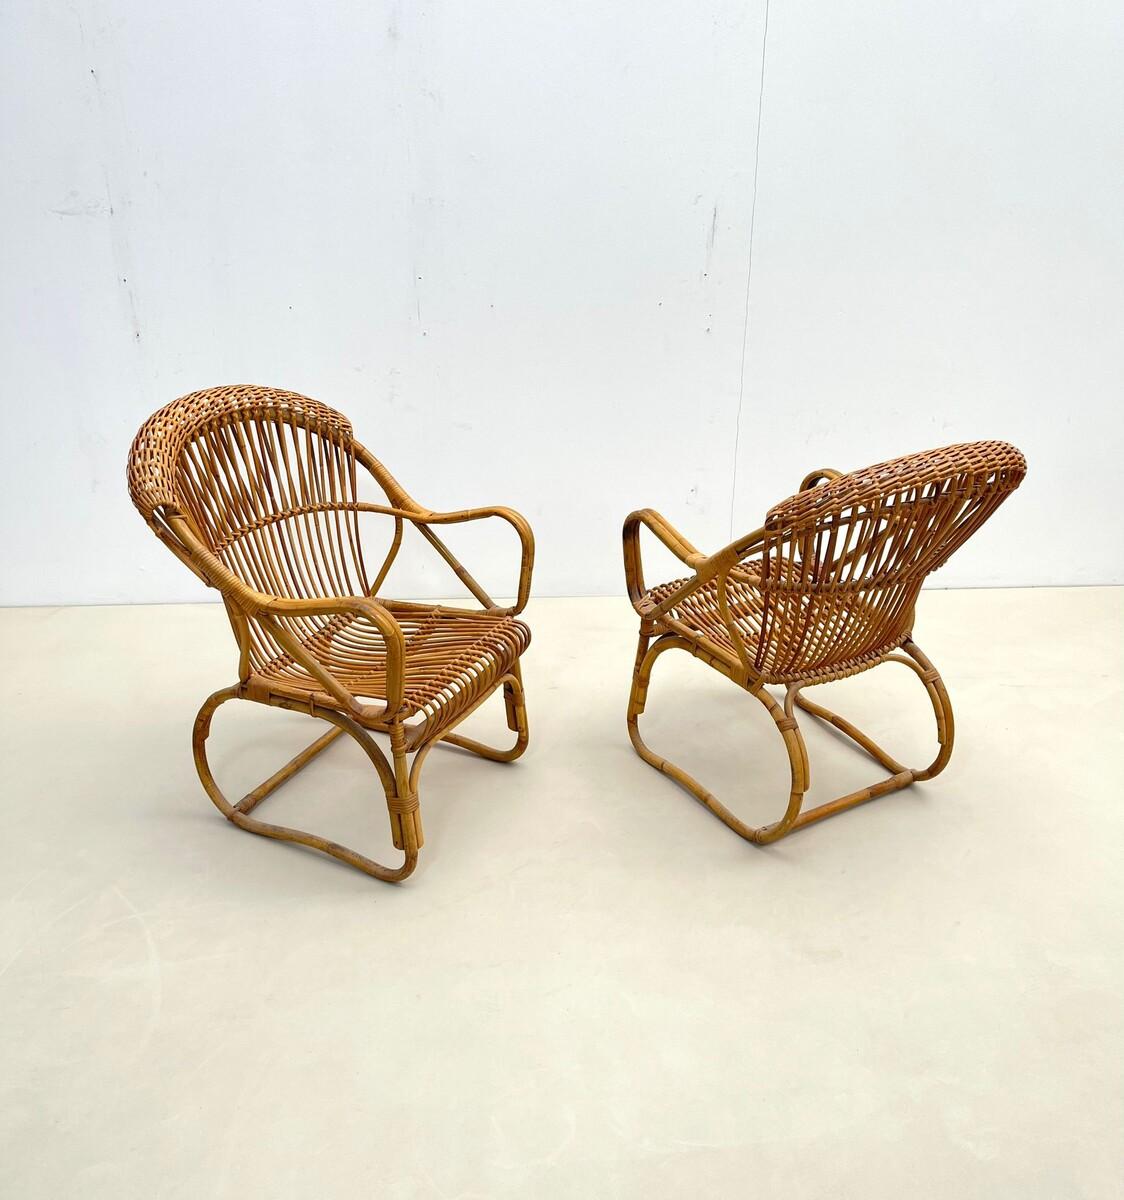 Pair of Mid-Century Modern Rattan Armchairs, Italy, 1960s For Sale 6